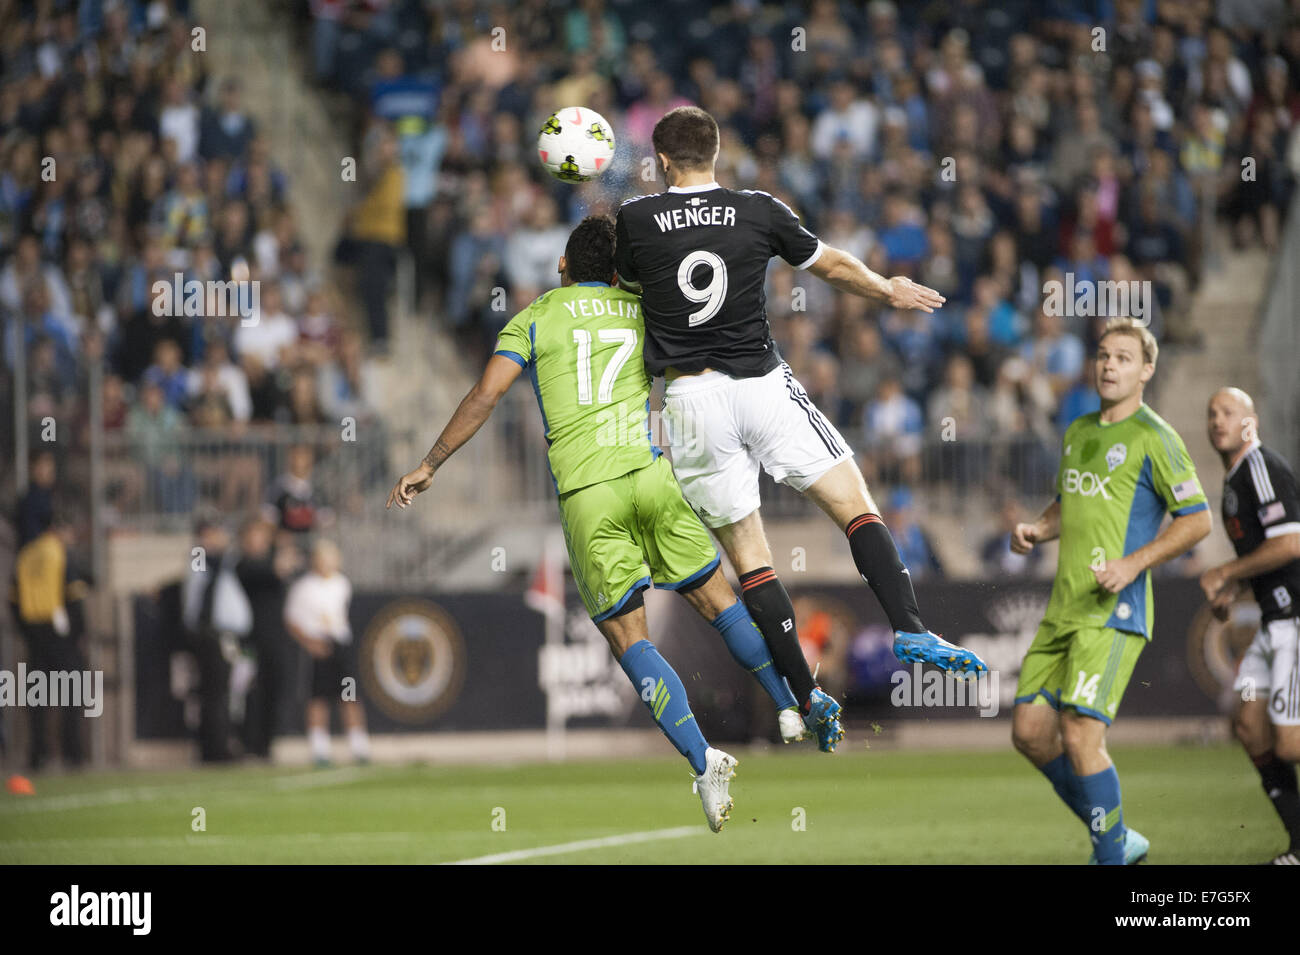 Chester, Pennsylvania, USA. 16th Sep, 2014. Philadelphia Union's ANDREW WENGER (9) and Sounder's DEANDRE YEDLIN, (17) in action during The LAMAR HUNT U.S. OPEN CUP TITLE The Seattle Sounders won with a 3-1 victory against the Philadelphia Union at PPL Park in Chester PA Credit:  Ricky Fitchett/ZUMA Wire/Alamy Live News Stock Photo